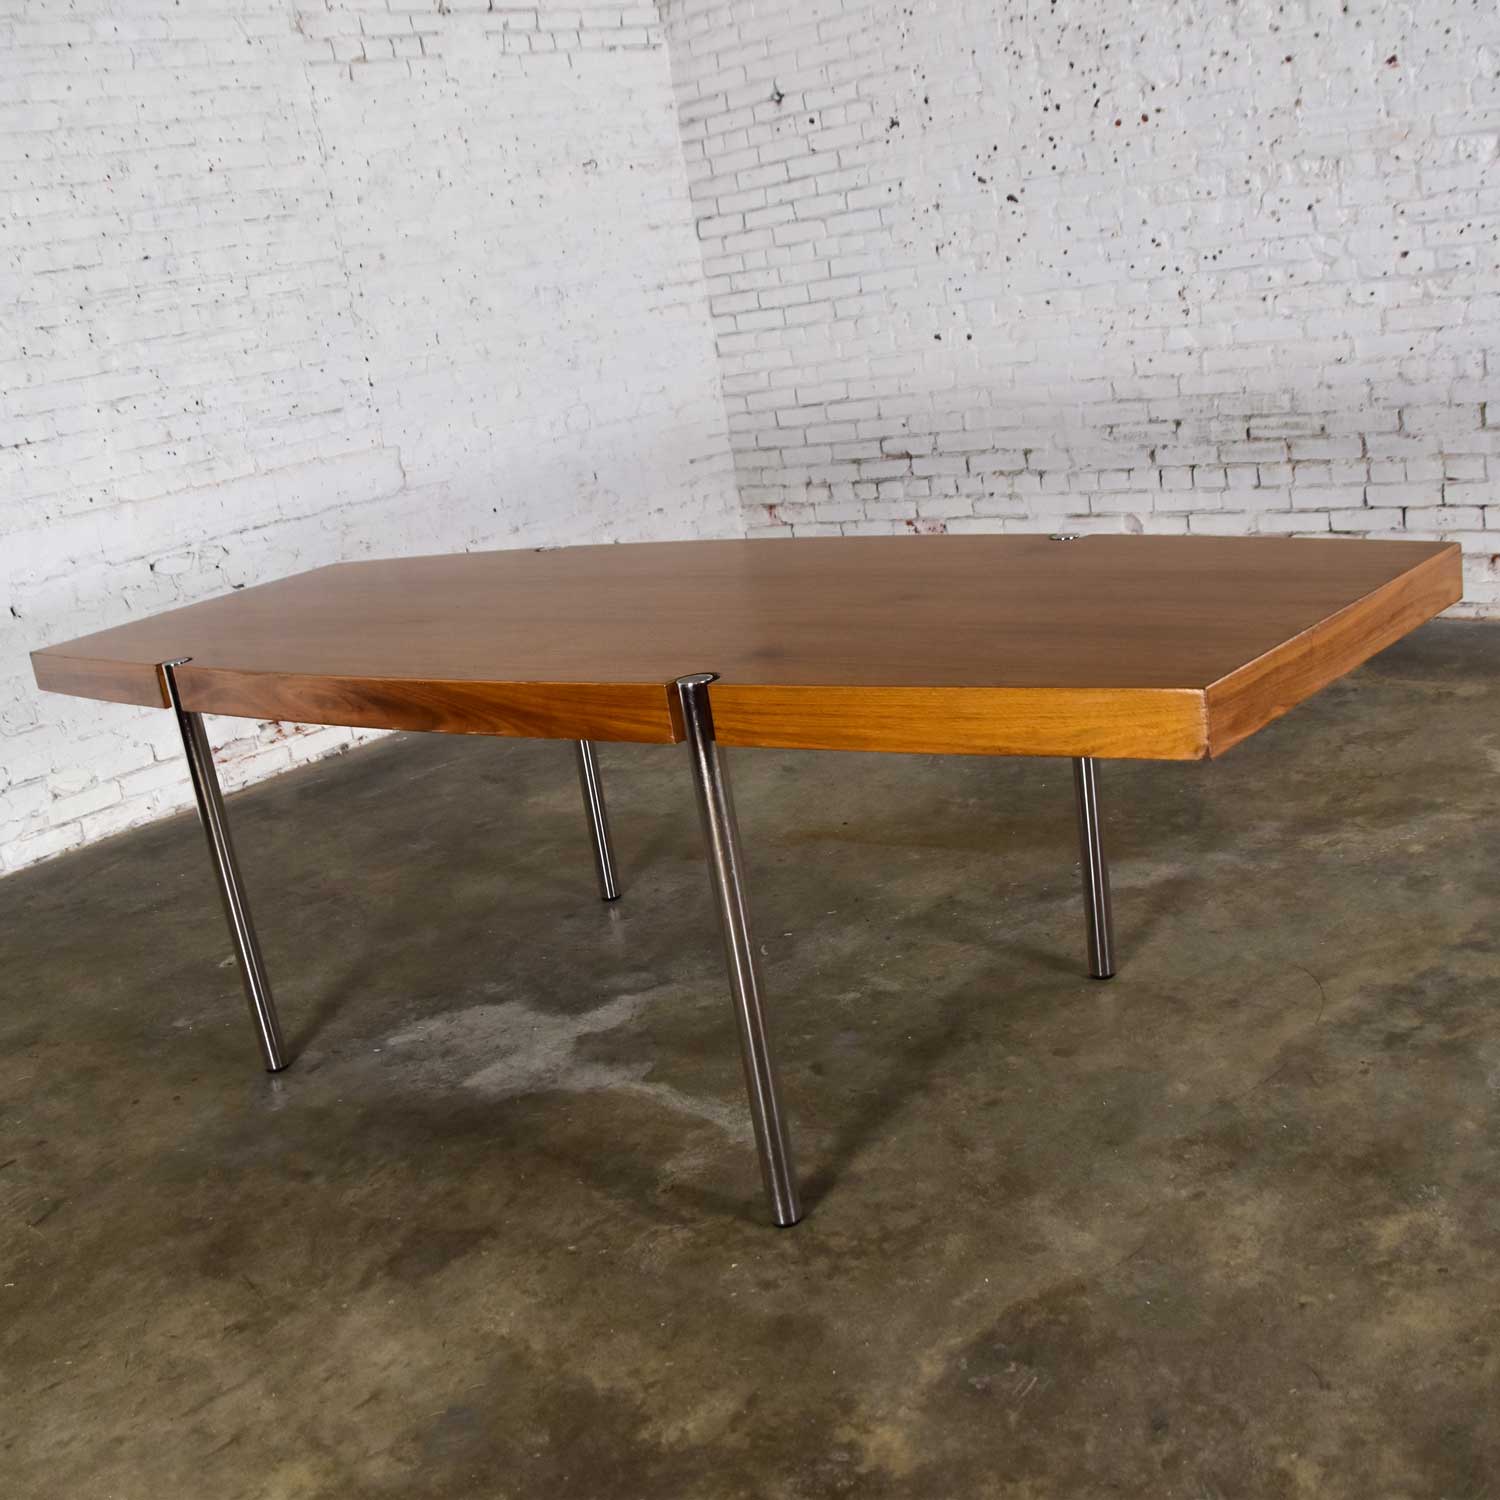 Modern Walnut and Chrome Boat Shaped Dining Conference Table by Jens Risom for Howe Furniture